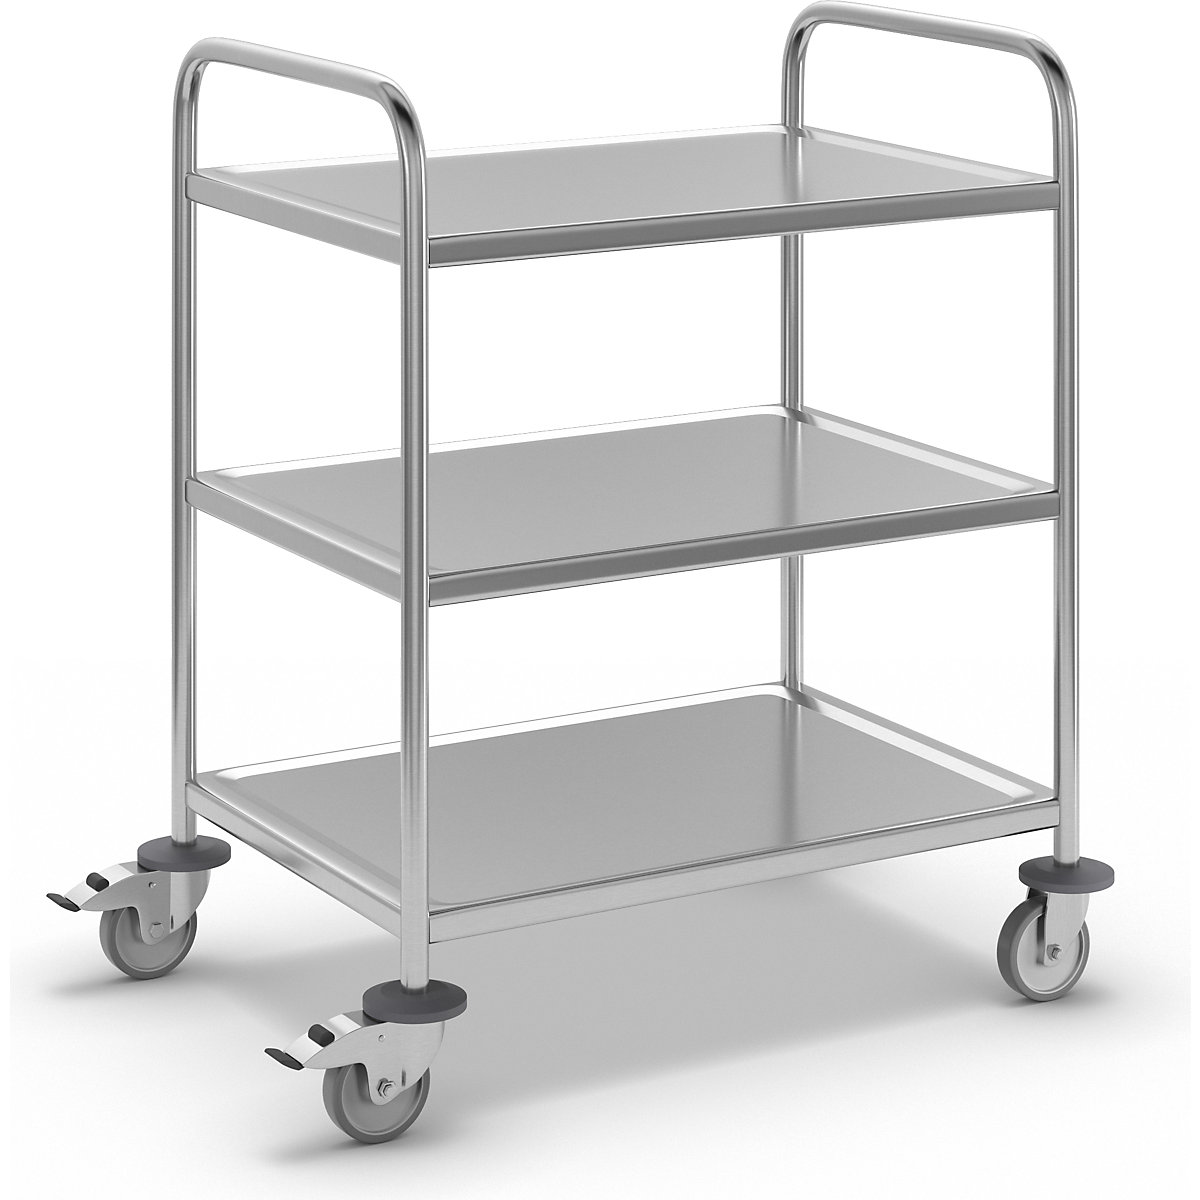 Stainless steel serving trolley – Kongamek, LxWxH 910 x 590 x 940 mm, with 3 shelves-8